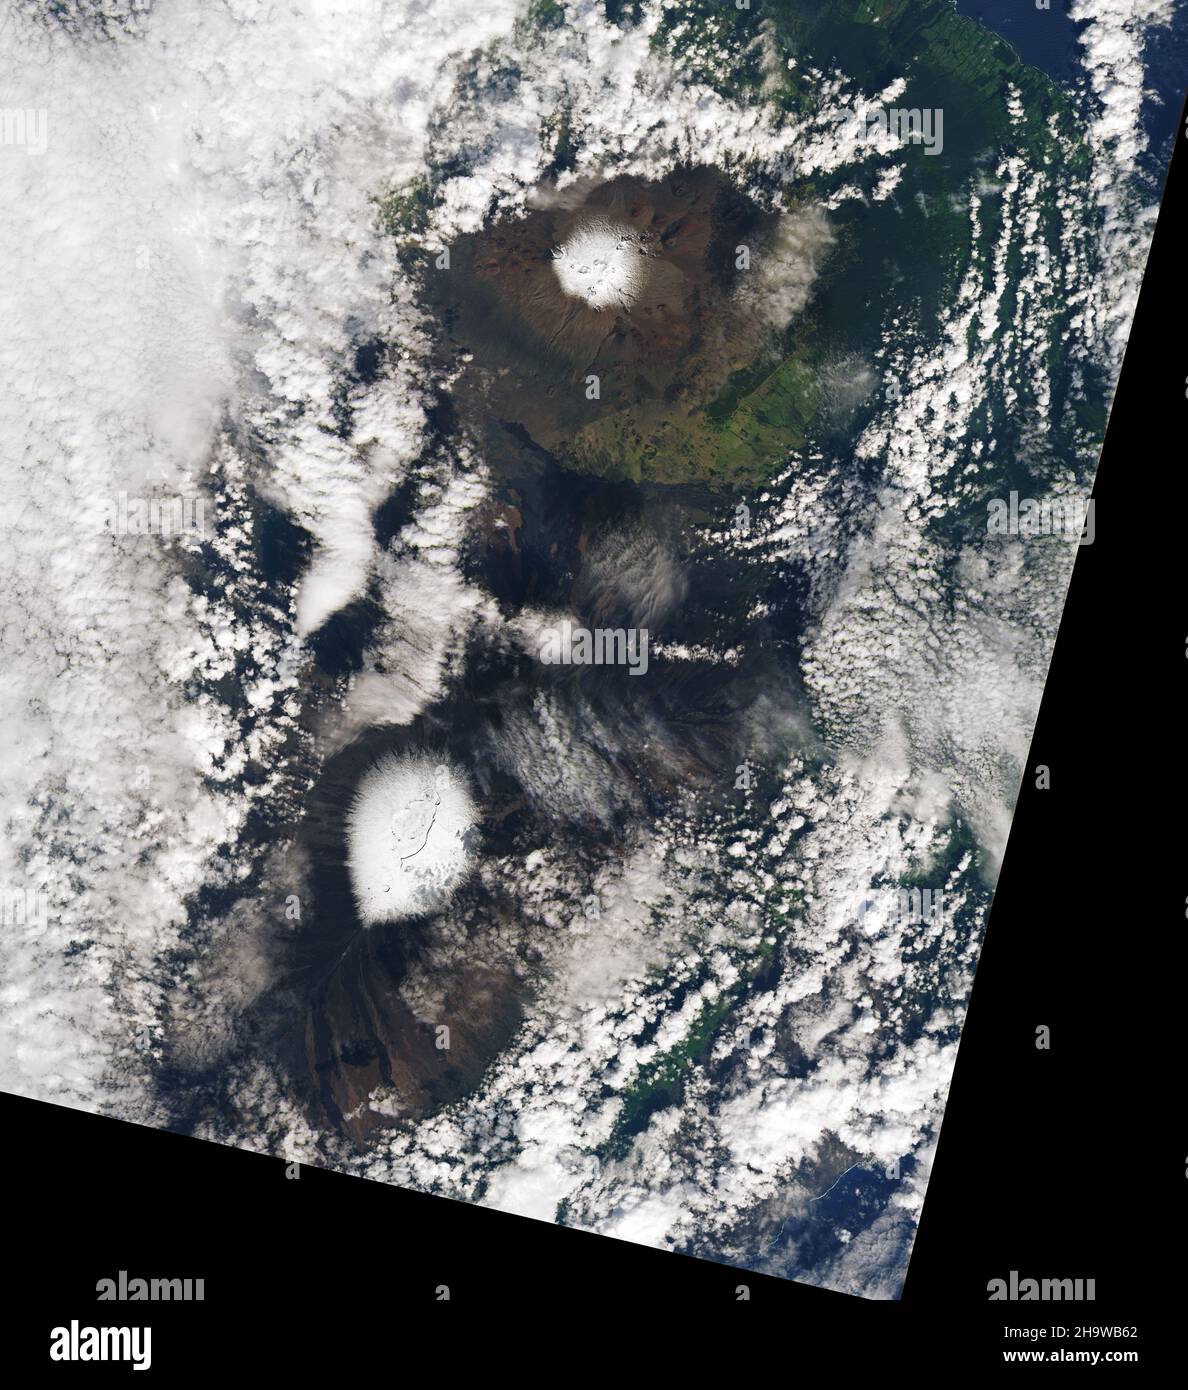 December 7, 2021 - Hawaii - A low-pressure system called a 'kona low' developed northwest of Hawaii in the first week of December 2021, dropping snow on the peaks of Mauna Kea and Mauna Loa. The storm also brought high winds, intense rainfall, and flash flooding, along with reports of landslides, downed trees, and power outages. Some roads and schools were closed, and Hawaii Governor declared a state of emergency. On Oahu, the Honolulu airport received 7.92 inches (20.12 centimeters) of rain on December 6, breaking the single-day record for December. (Credit Image: © NASA Earth/ZUMA Press Wire Stock Photo